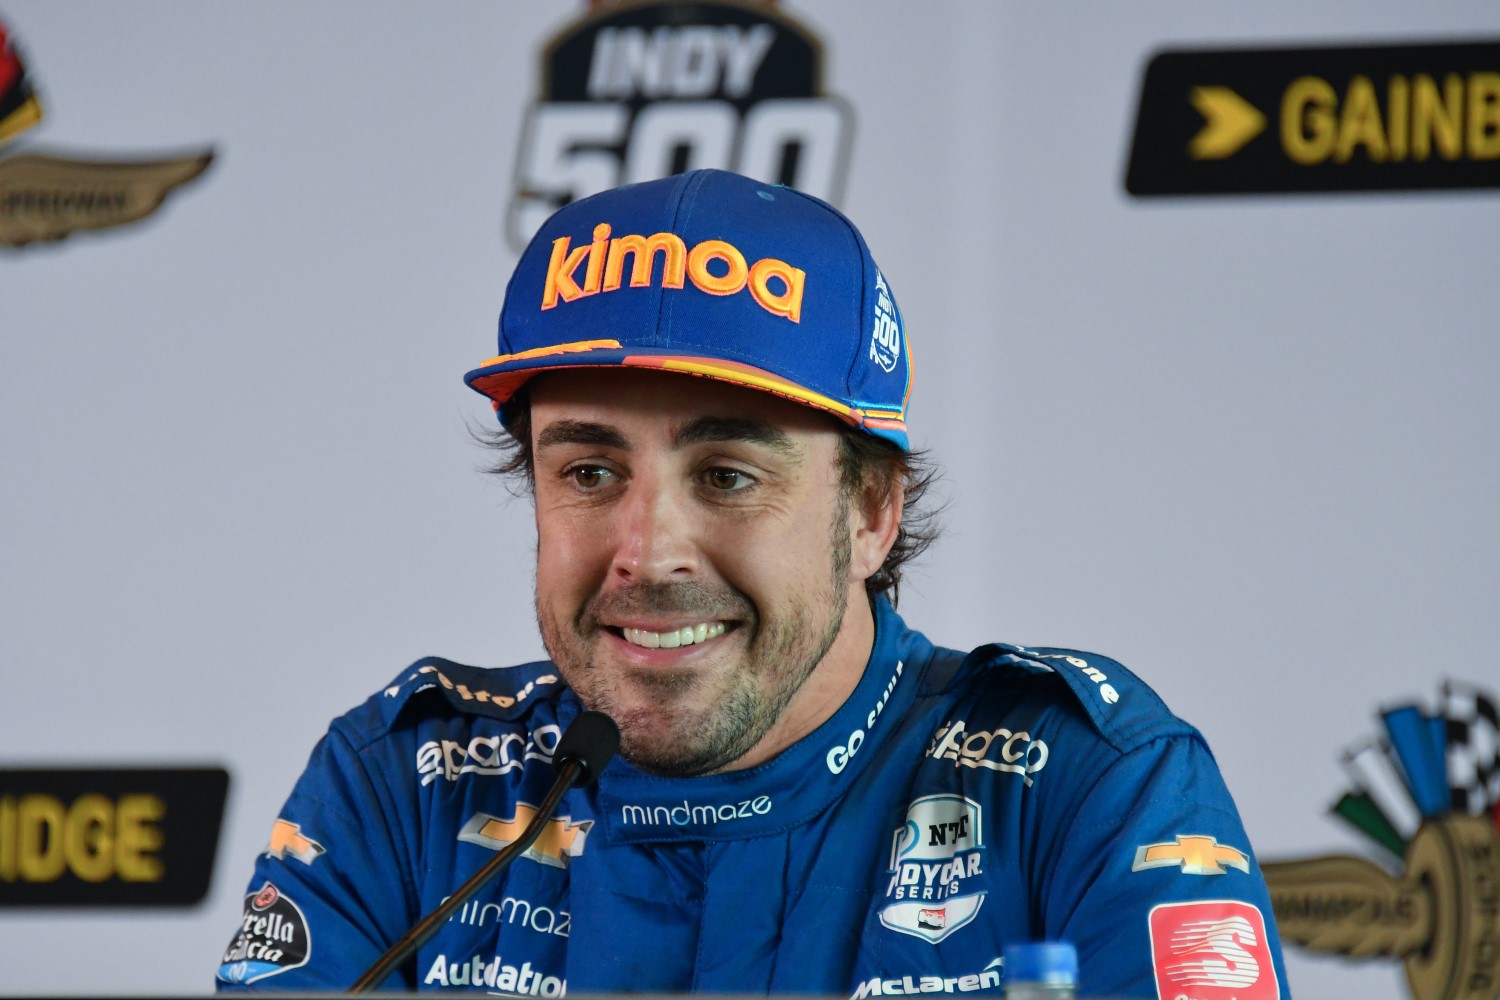 Browns thinks Alonso would be very successful in IndyCar